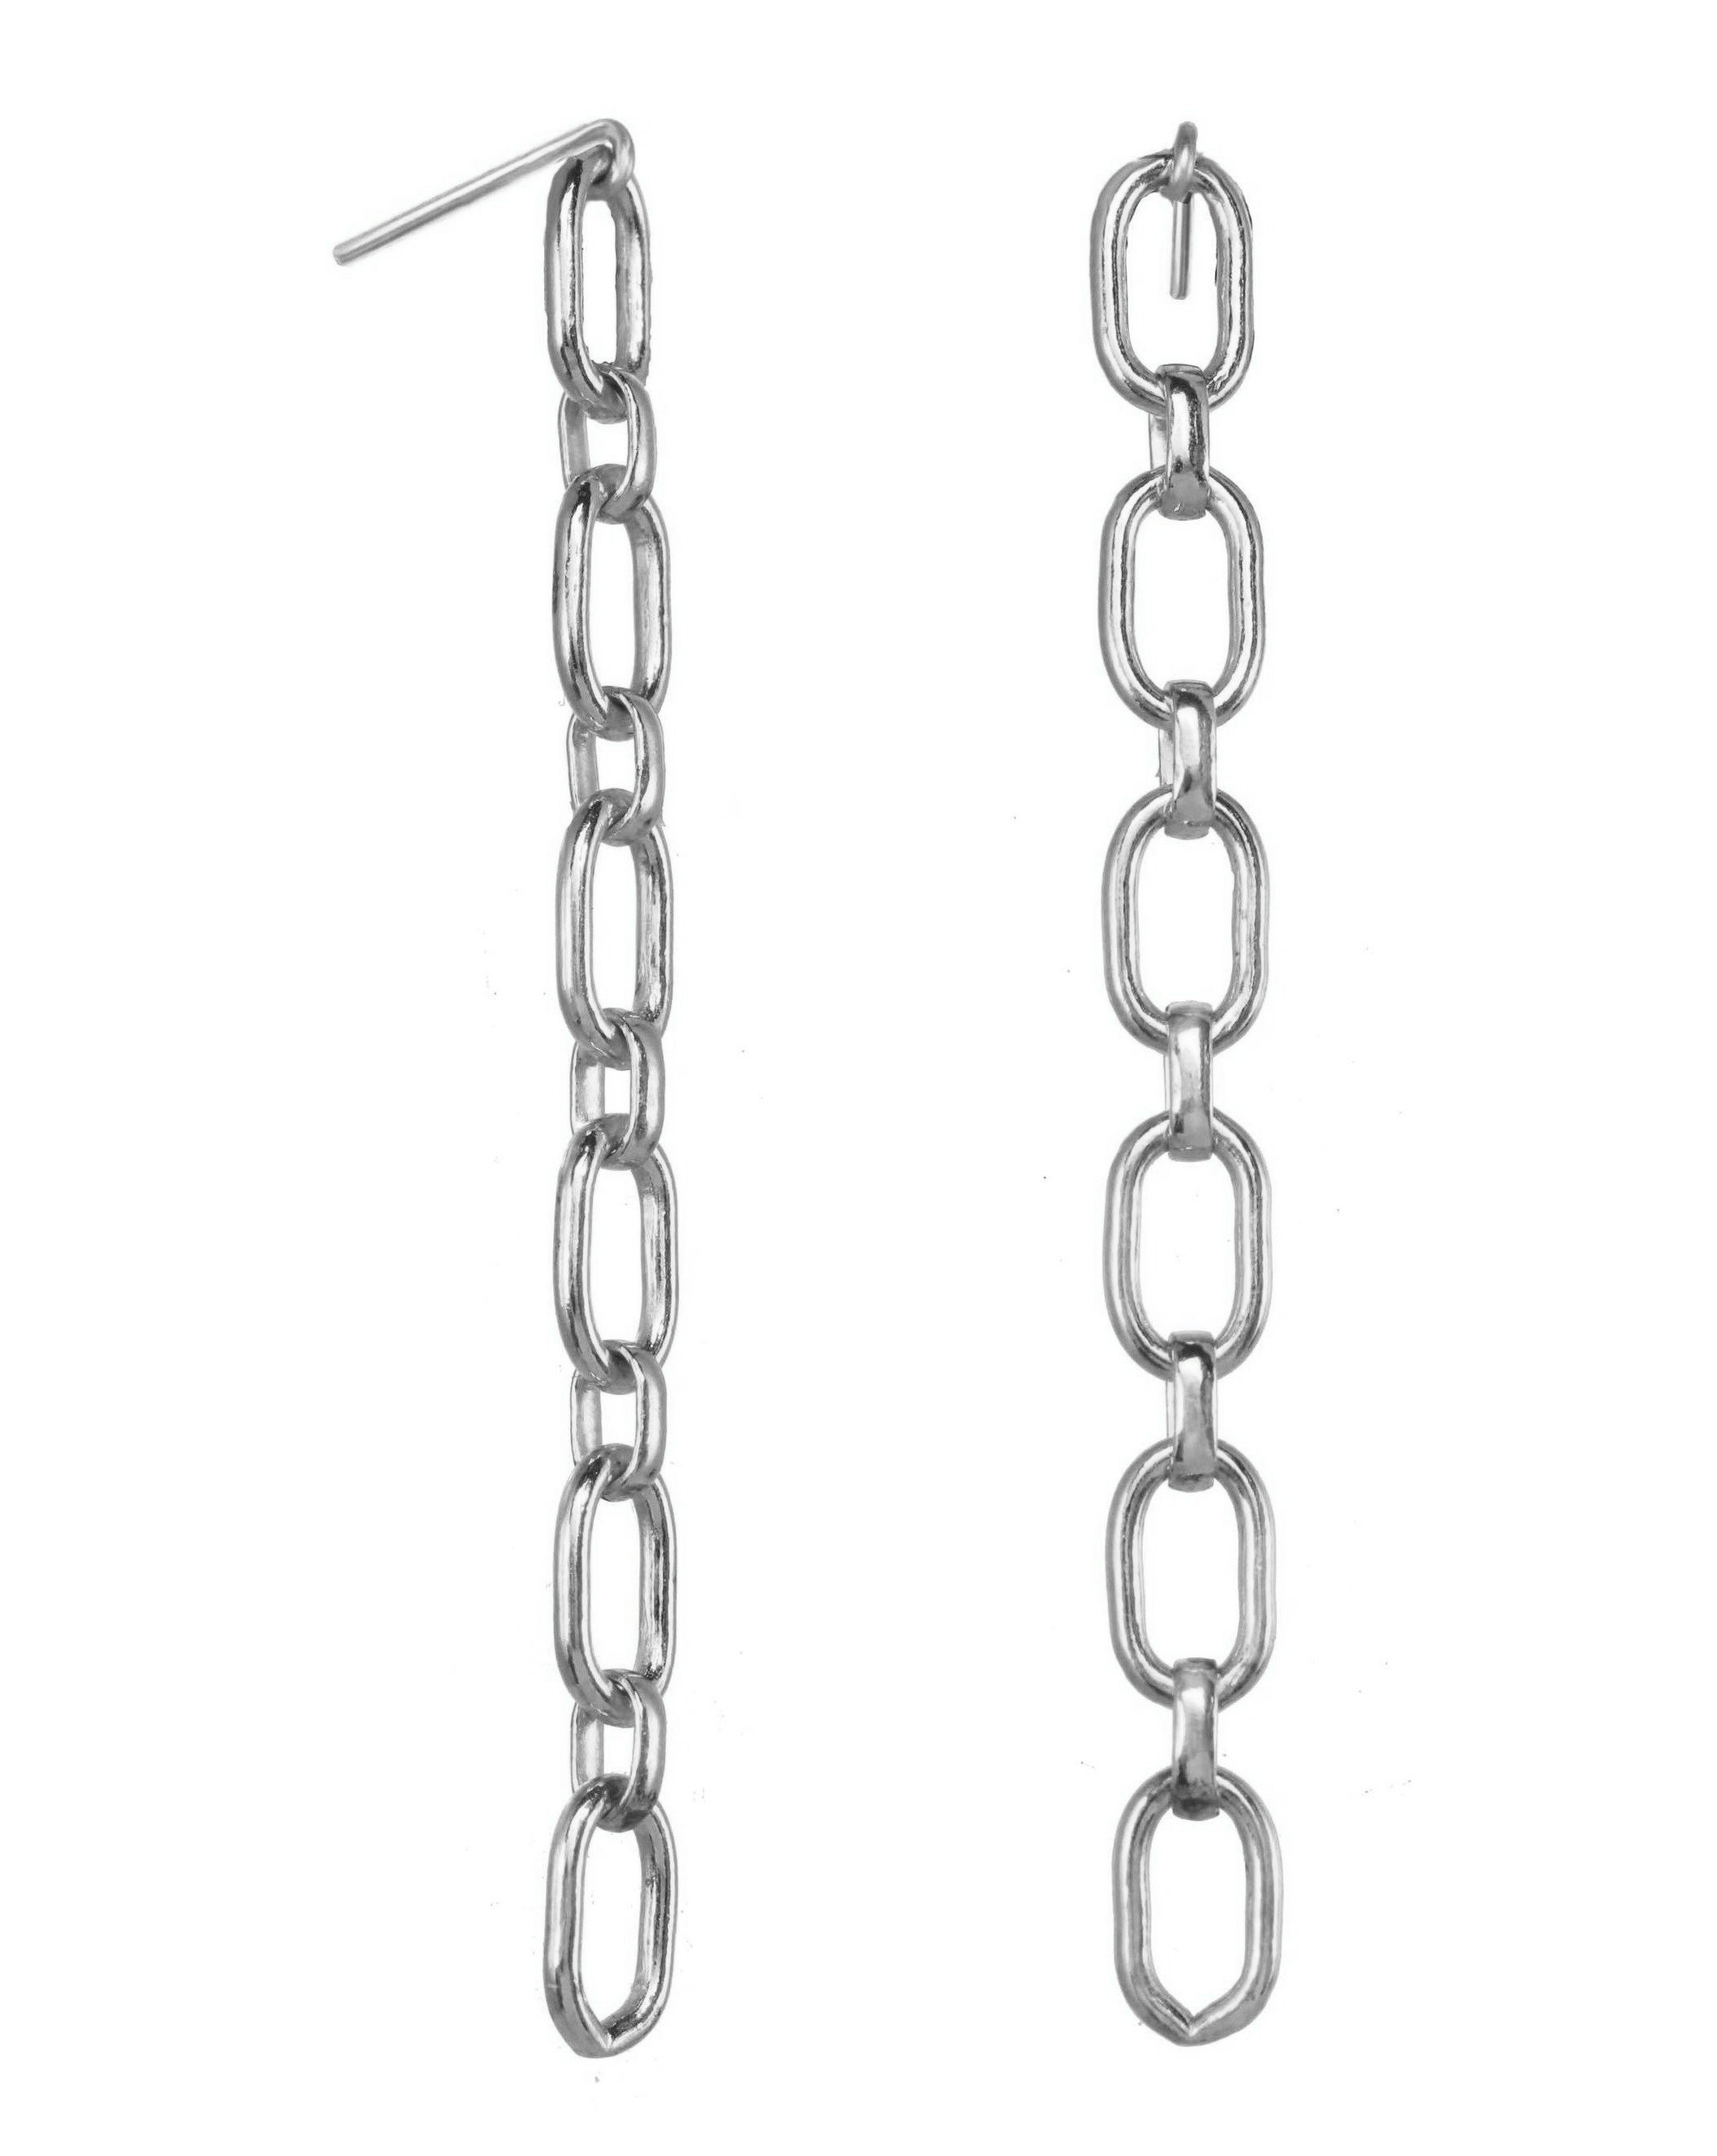 Finito Earrings by KOZAKH. 1.5 inch drop chain earrings, crafted in Sterling Silver.